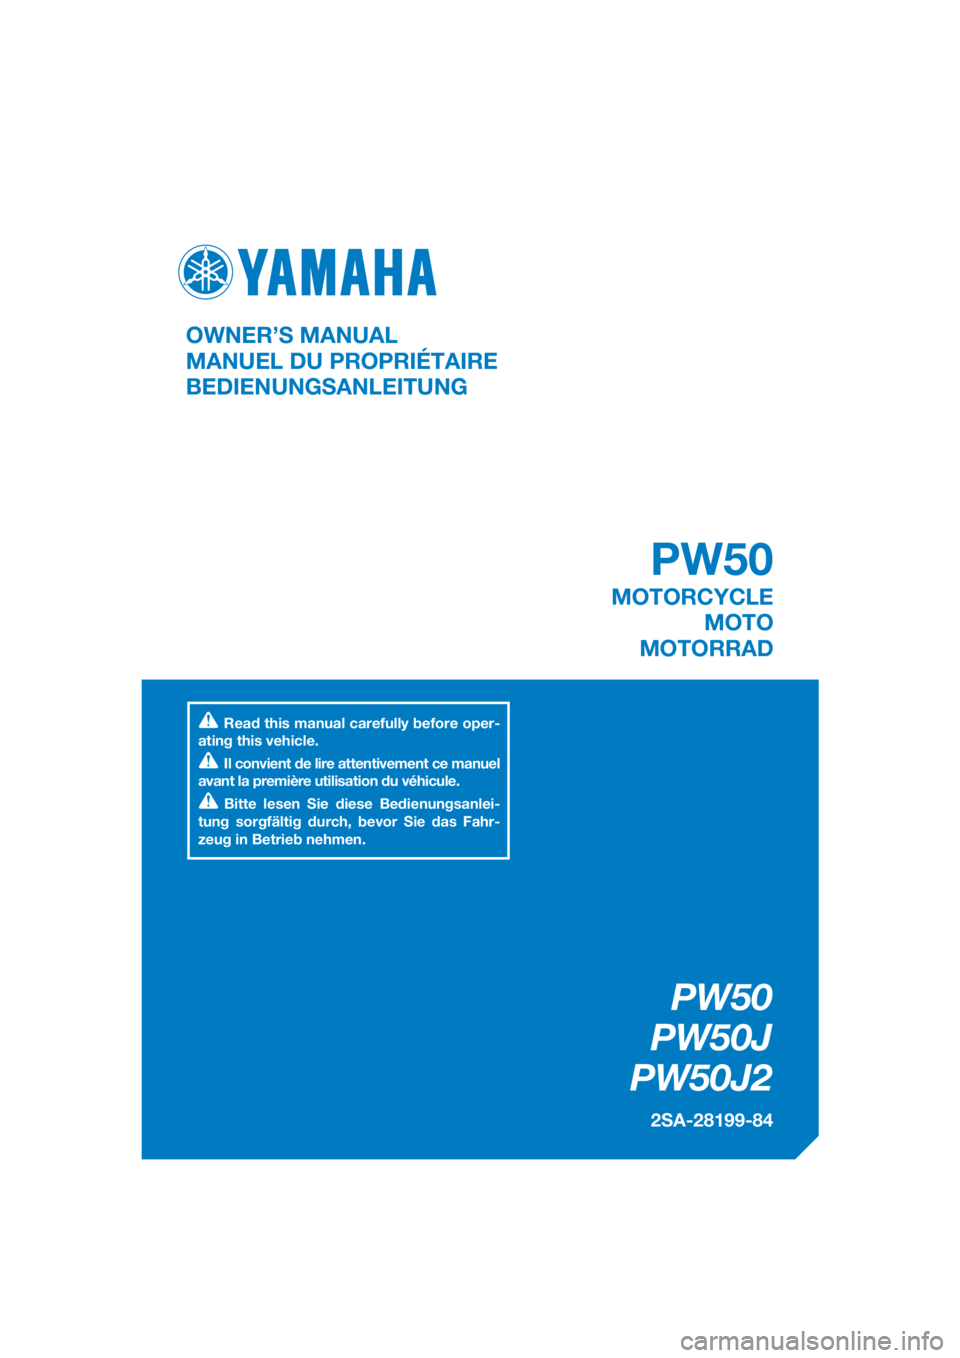 YAMAHA PW50 2018  Owners Manual DIC183
PW50
PW50J
PW50J2
2SA-28199-84
OWNER’S MANUAL
MANUEL DU PROPRIÉTAIRE
BEDIENUNGSANLEITUNG
Read this manual carefully before oper-
ating this vehicle.
Il convient de lire attentivement ce manu